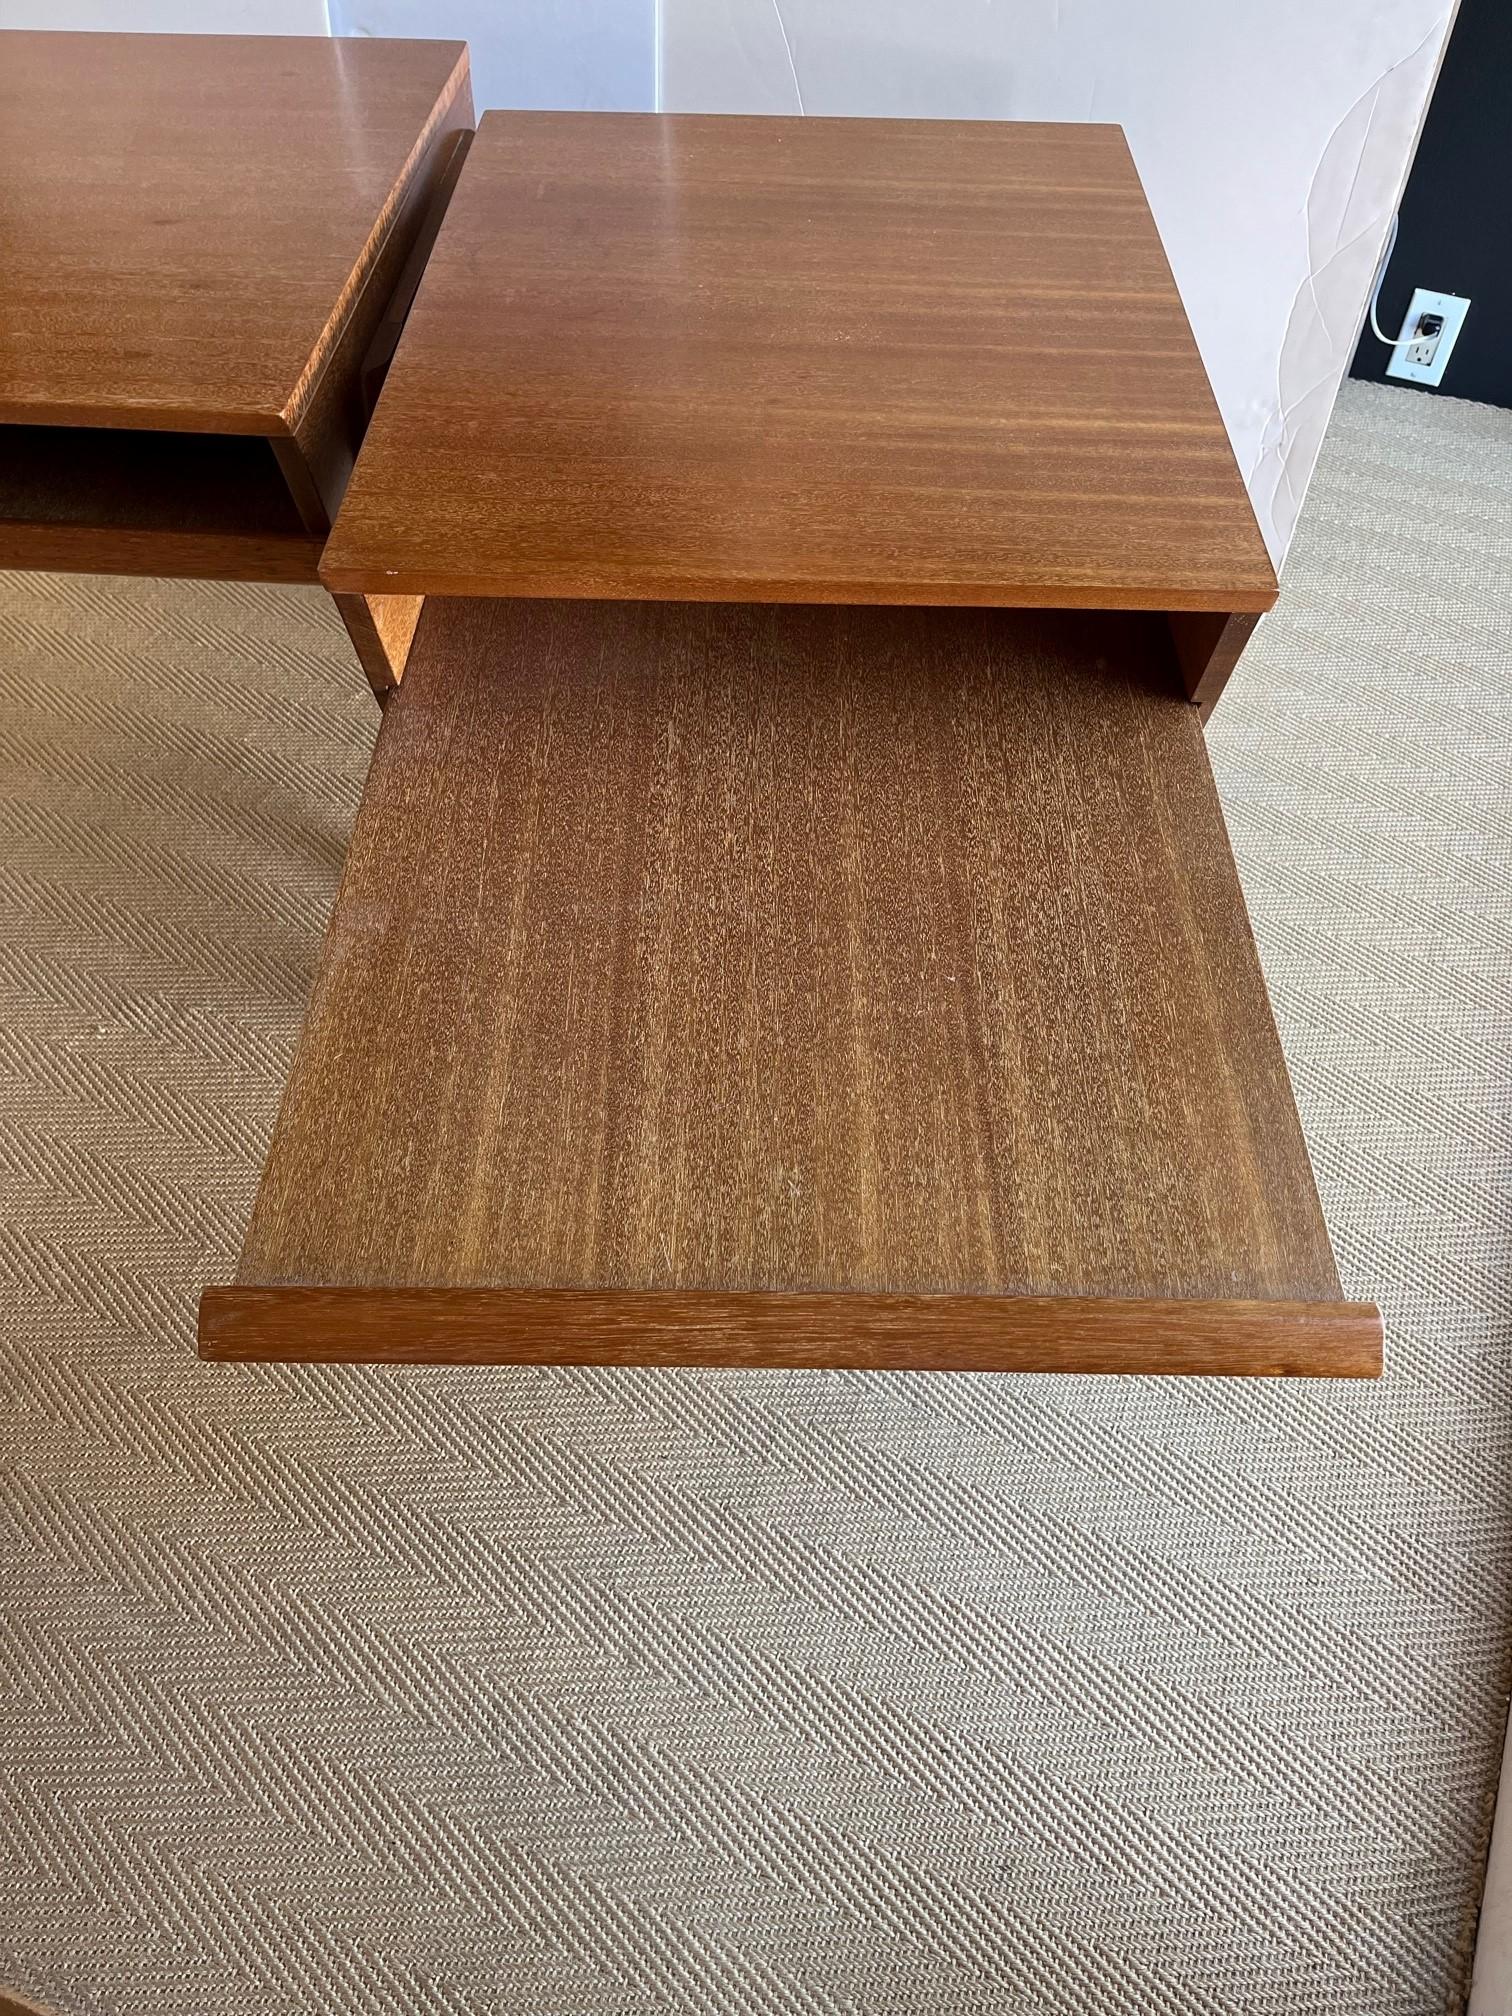 Hand-Crafted Pair of Mid-Century Modern Tray Side Table Designed by John Keal  For Sale